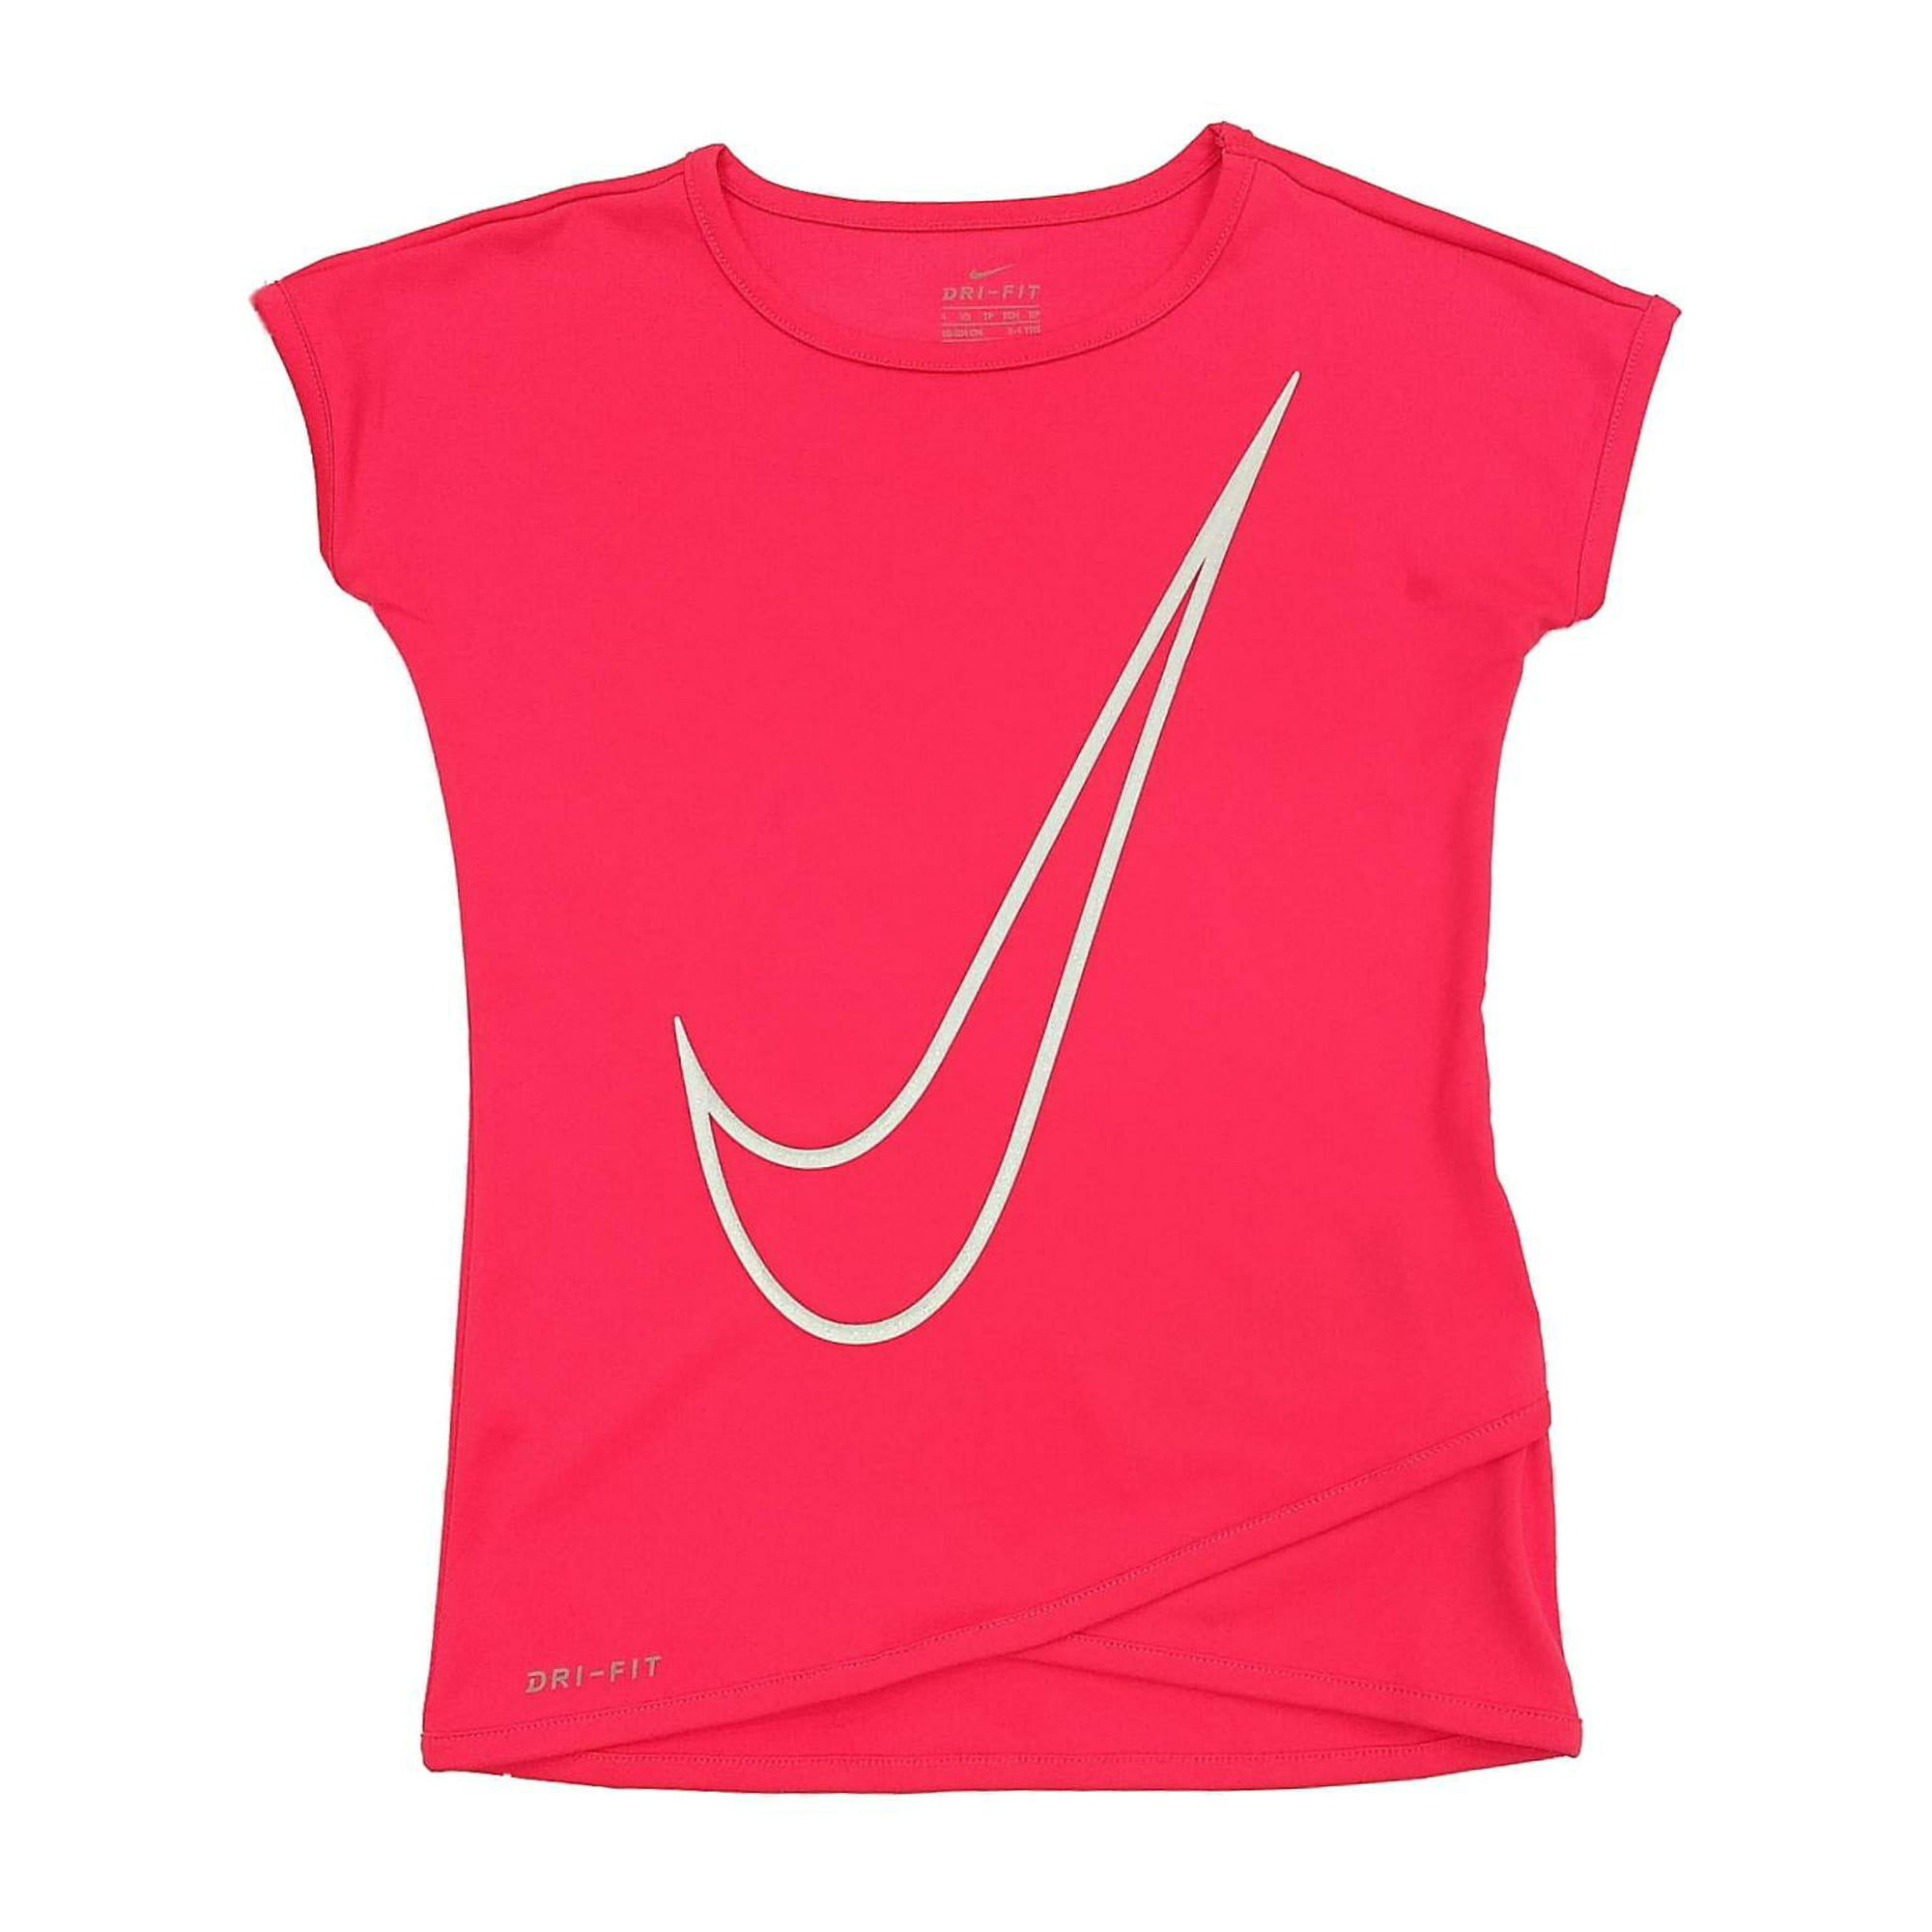 Nike Girls Silky Coral Pink Swoosh Athletic T-Shirt Work Out Shirt M (6) - Walmart.com